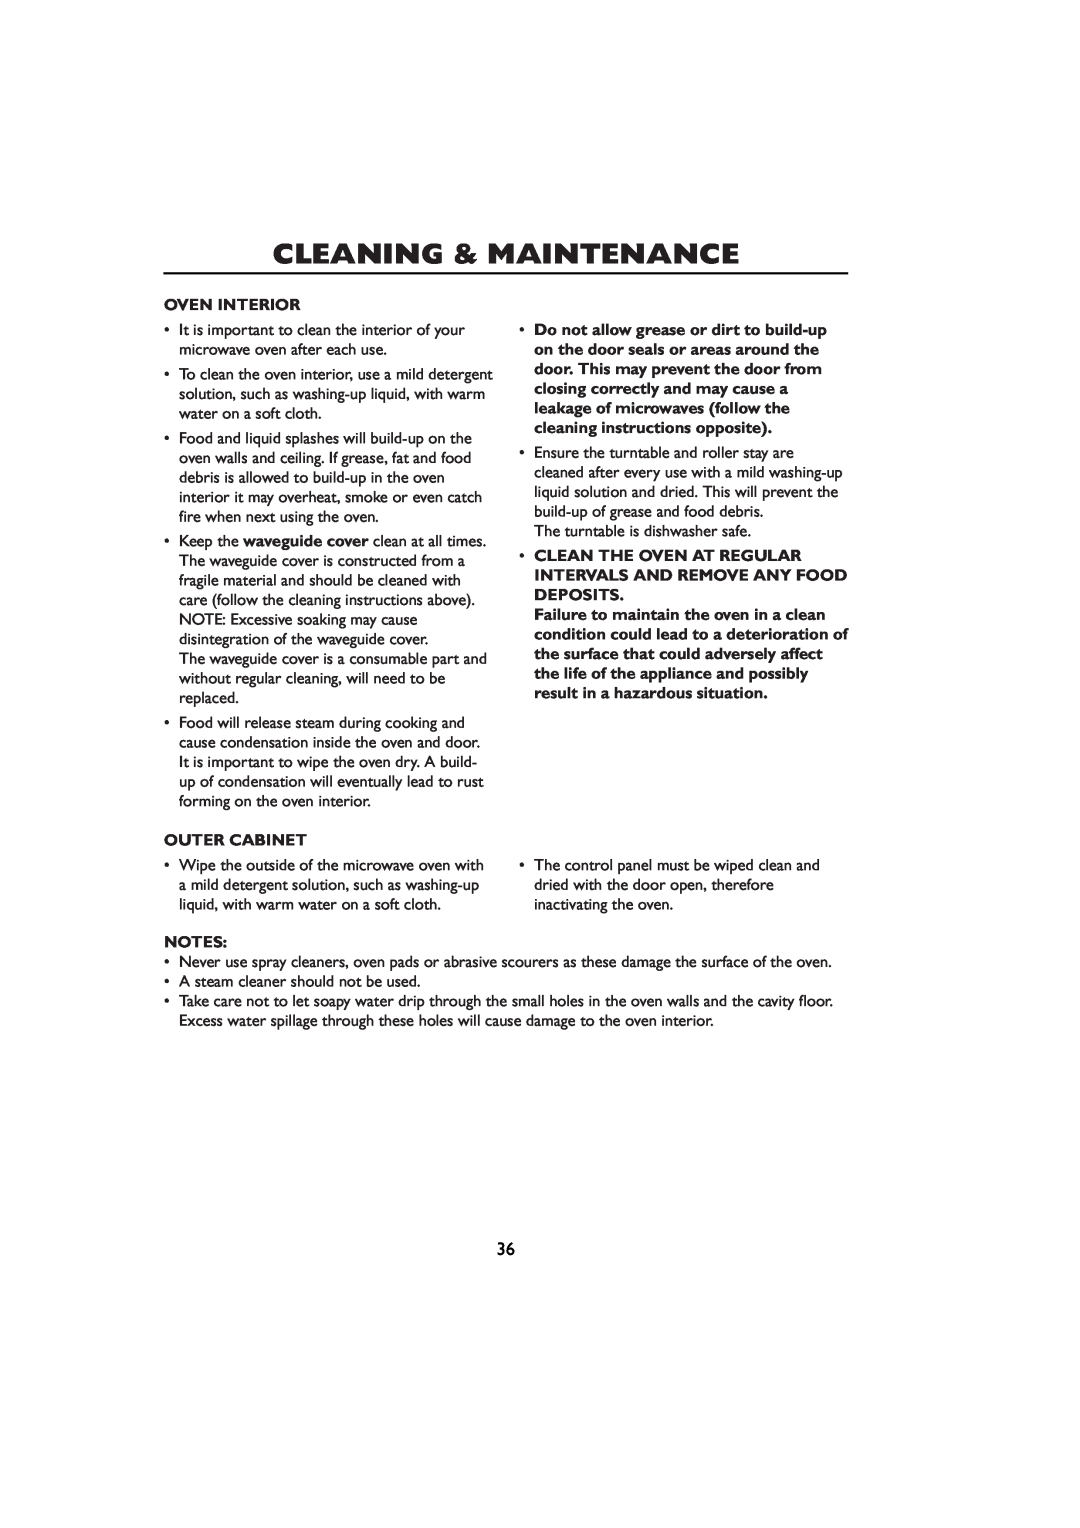 Sharp R-259 operation manual Cleaning & Maintenance, Oven Interior, Outer Cabinet 